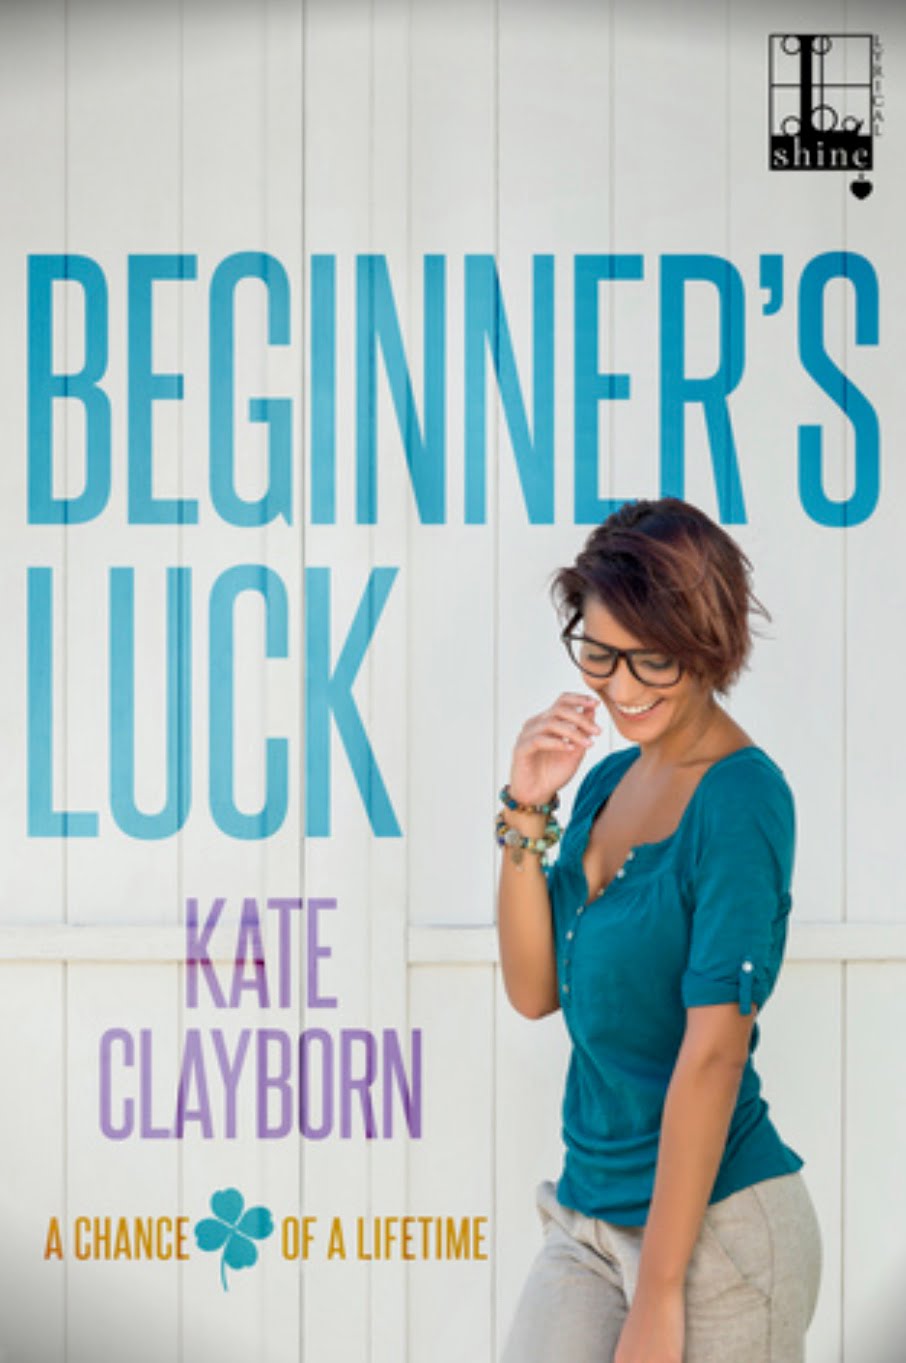 BEGINNERS LUCK BY KATE CLAYBORN – BOOK REVIEW